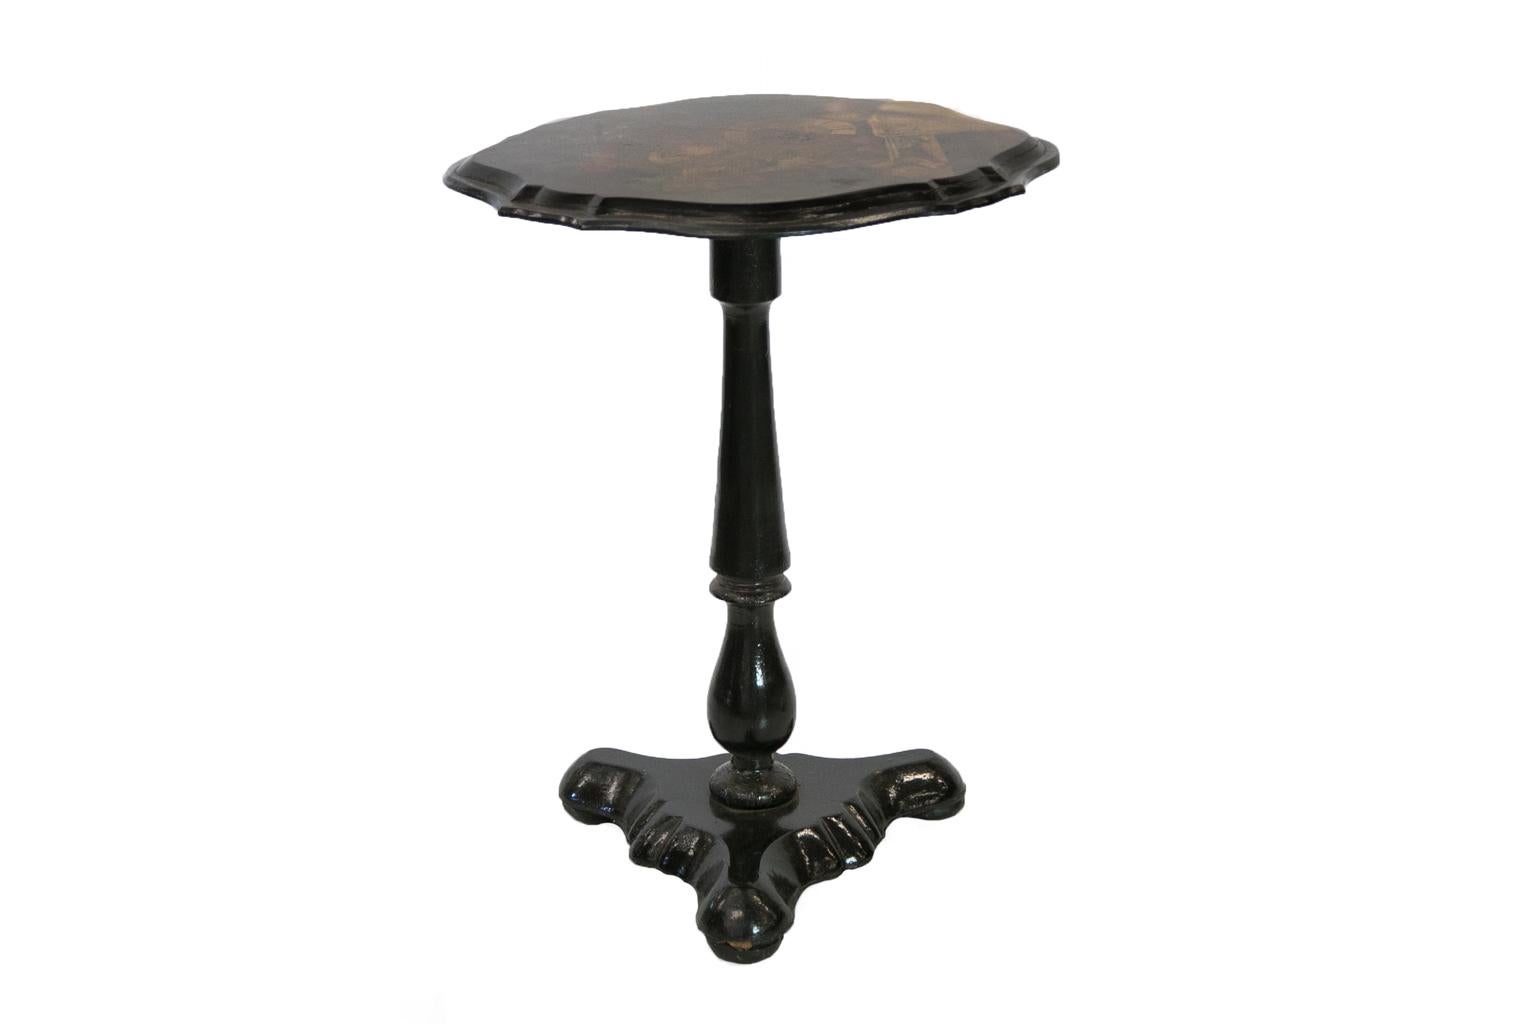 Lacquer and papier-mâché tilt-top table has a painting of still life depicting fruit and a jeweled urn. The top has a scalloped shape, and the turned stem terminates in a trefoil platform base.